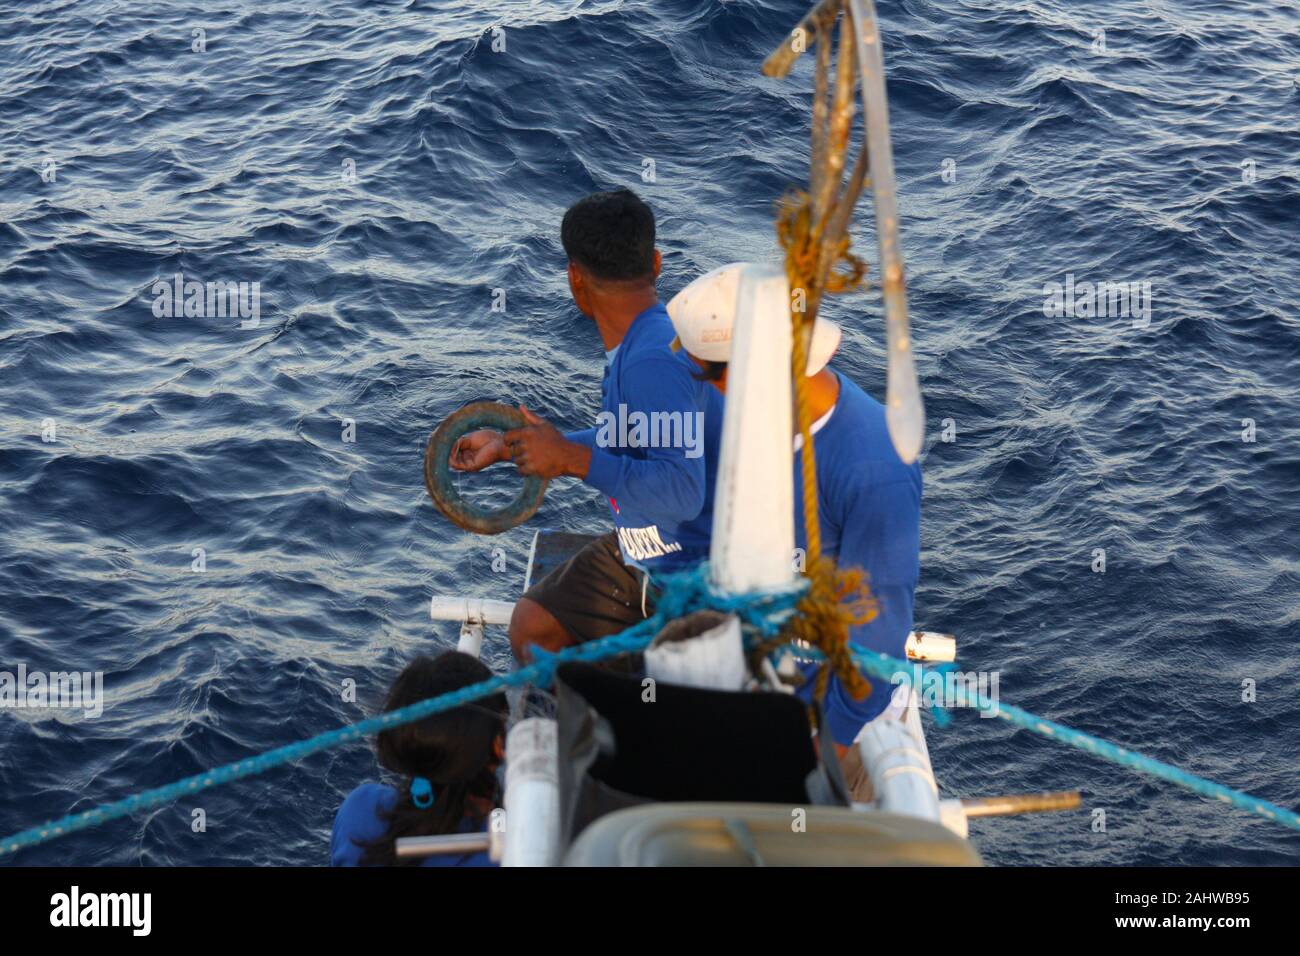 https://c8.alamy.com/comp/2AHWB95/artisanal-yellowfin-tuna-handline-fishing-in-the-waters-of-mindoro-strait-south-china-sea-with-payaos-anchored-fads-2AHWB95.jpg